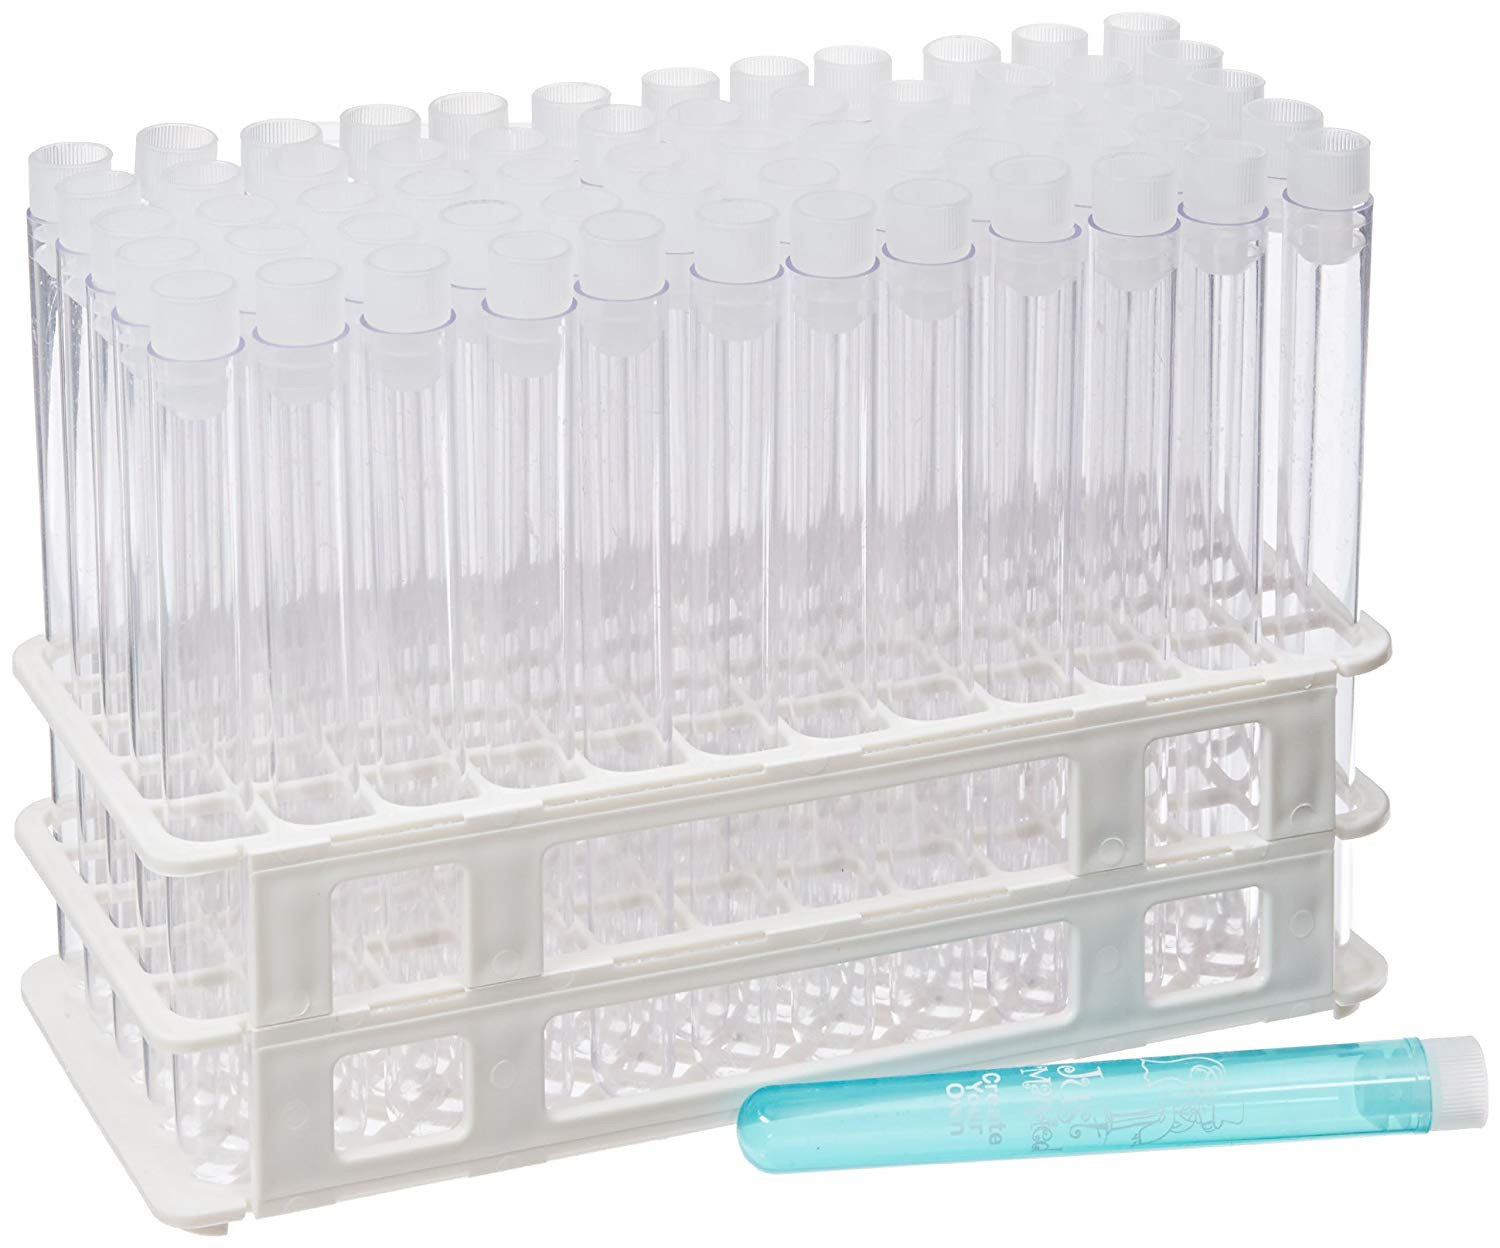 24 Nice Test Tube Flower Vase Rack 2024 free download test tube flower vase rack of amazon com test tubes lab tubes industrial scientific intended for 60 tube 16x150mm clear plastic test tube set with caps and rack